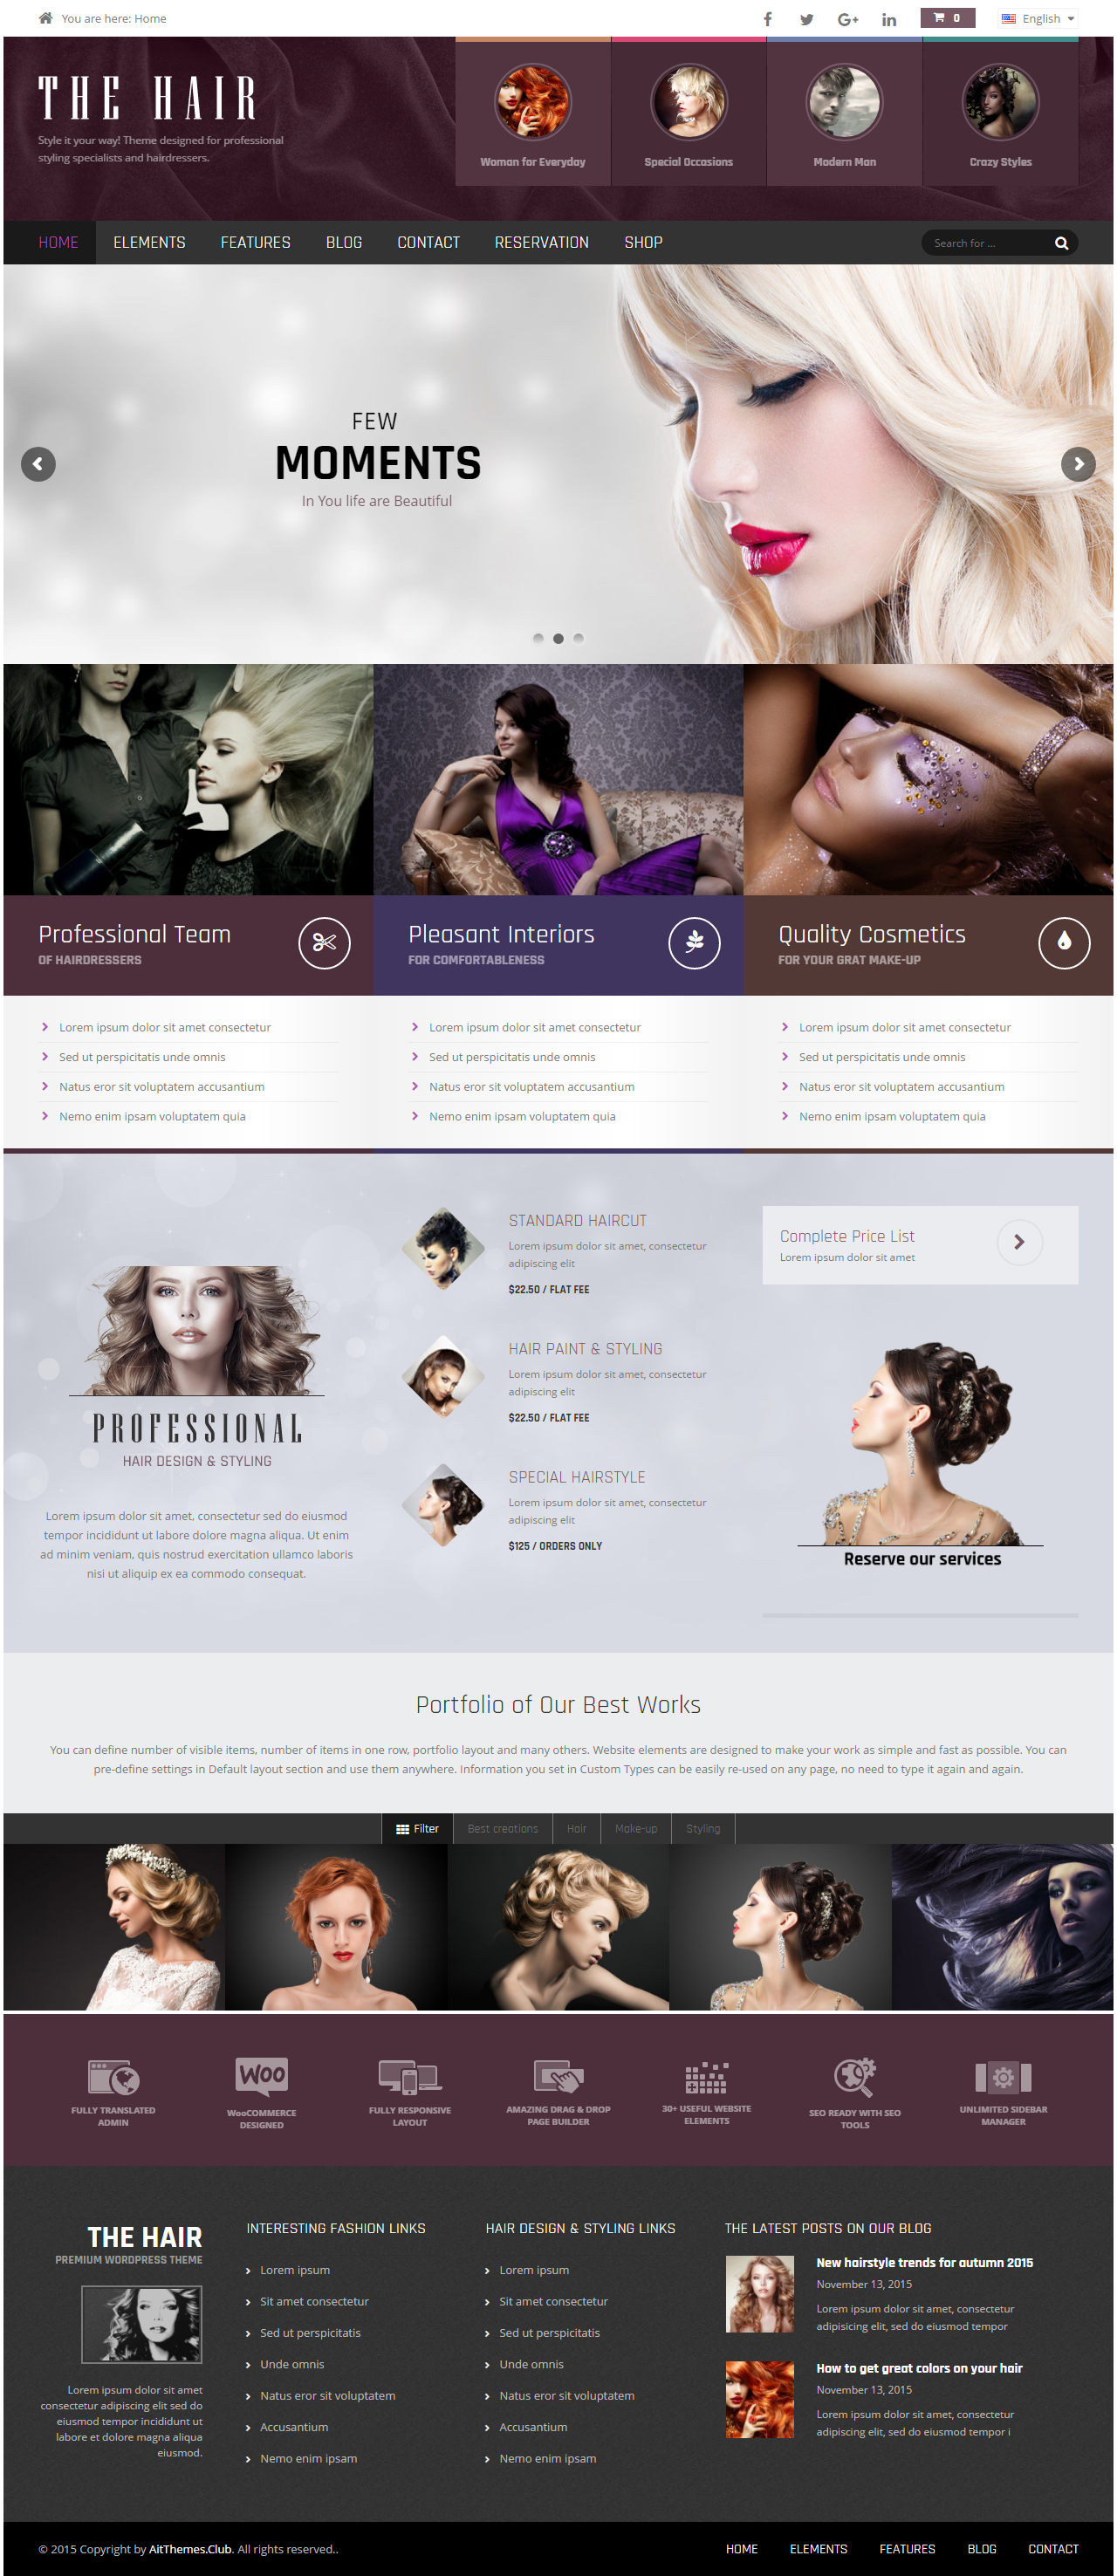 web design services in pune - Theme for Hair Salons - Web Design Services in Pune